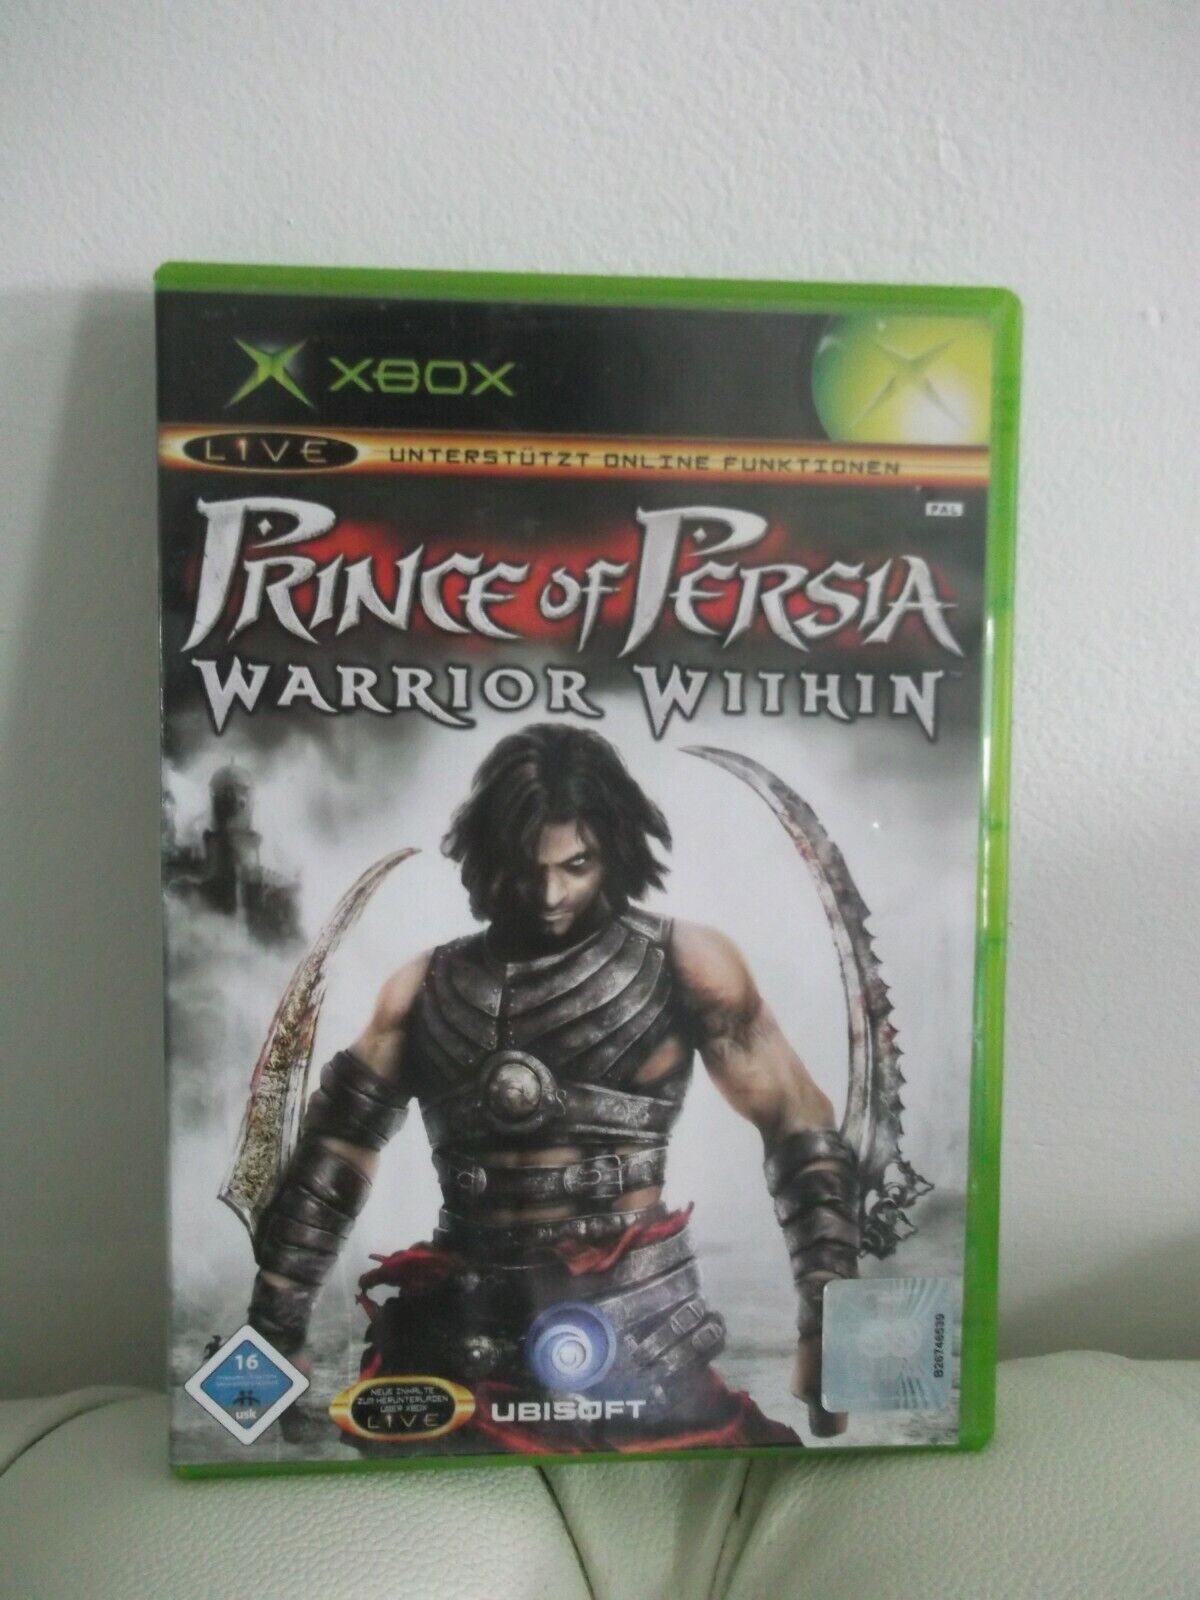 PRINCE OF PERSIA WARRIOR WITHIN - Jeu XBOX complet - Version allemande